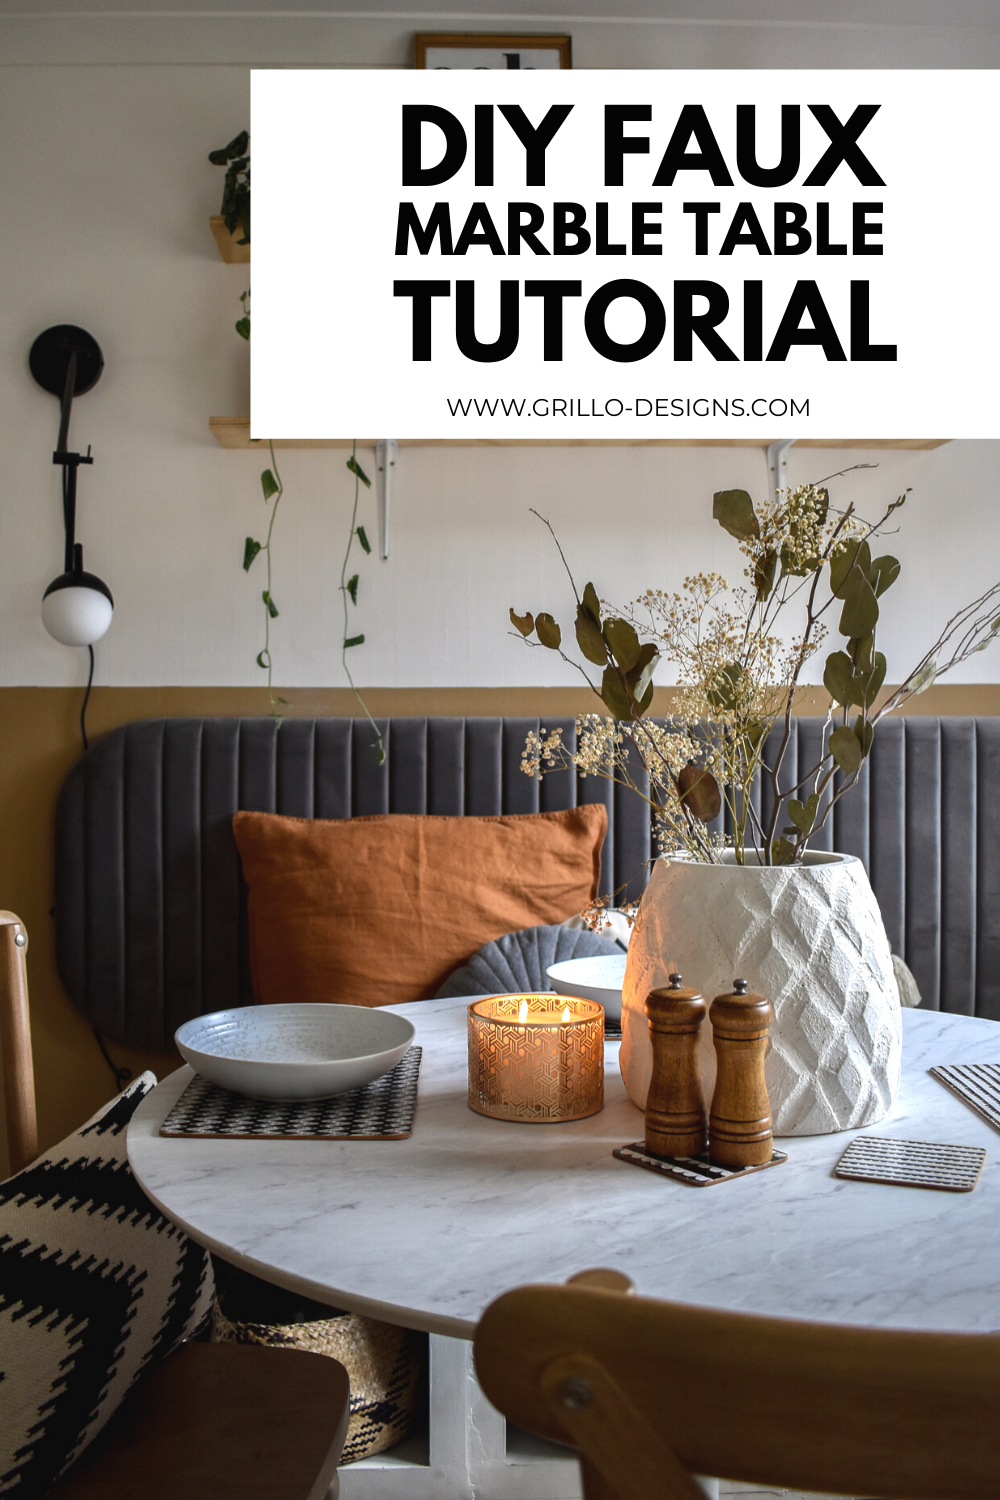 DIY faux marble table tutorial pinterest graphic